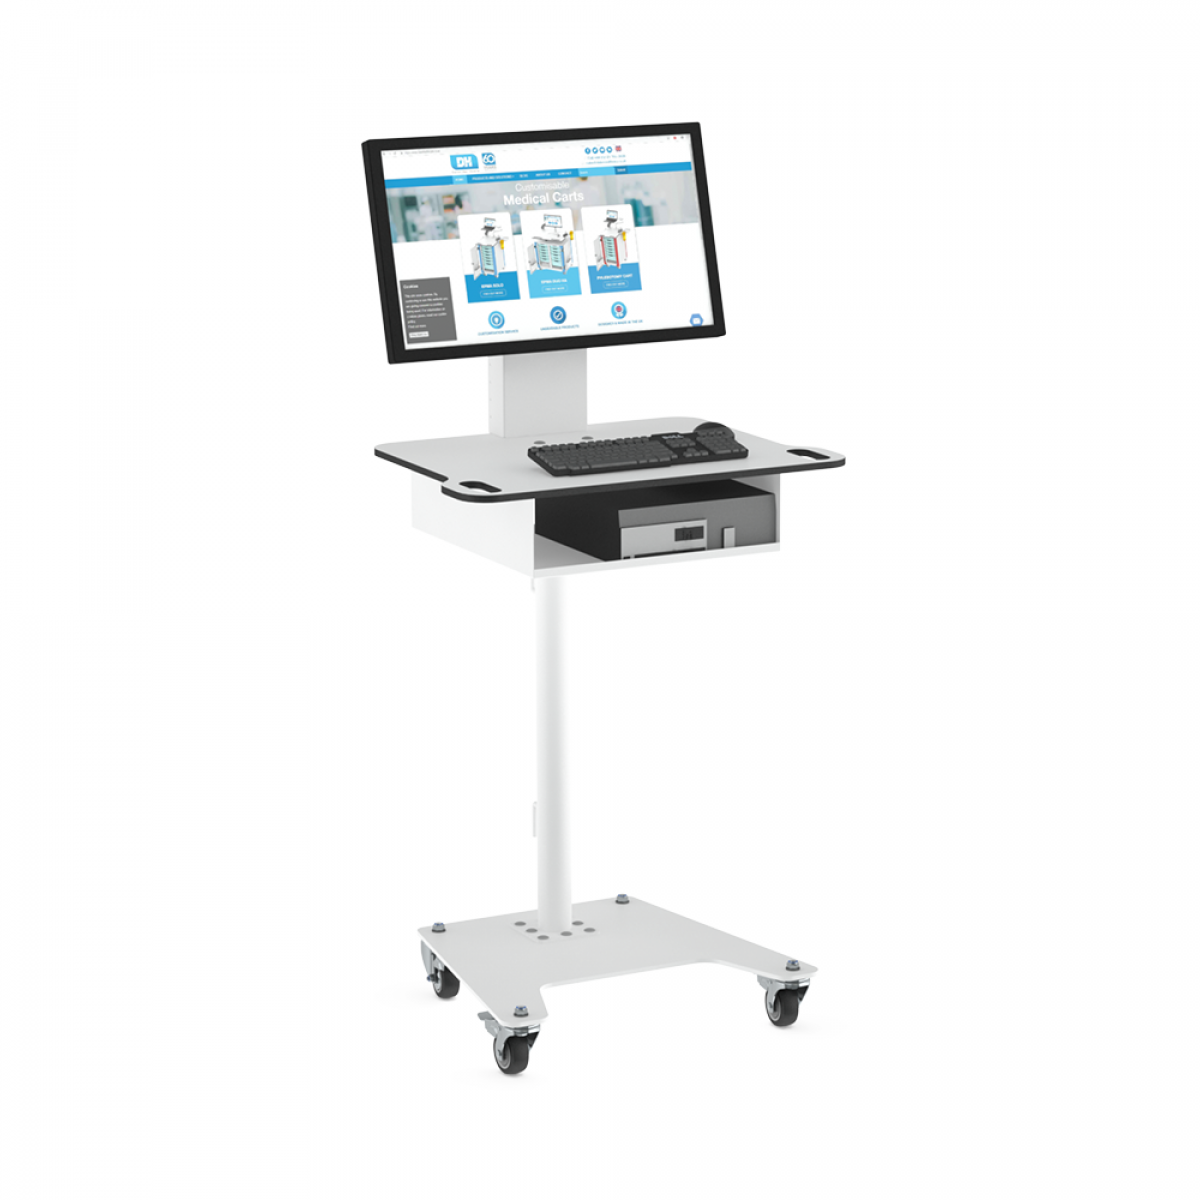 The Nightingale Cart from Dalen Healthcare  with PC (VESA) screen-mount